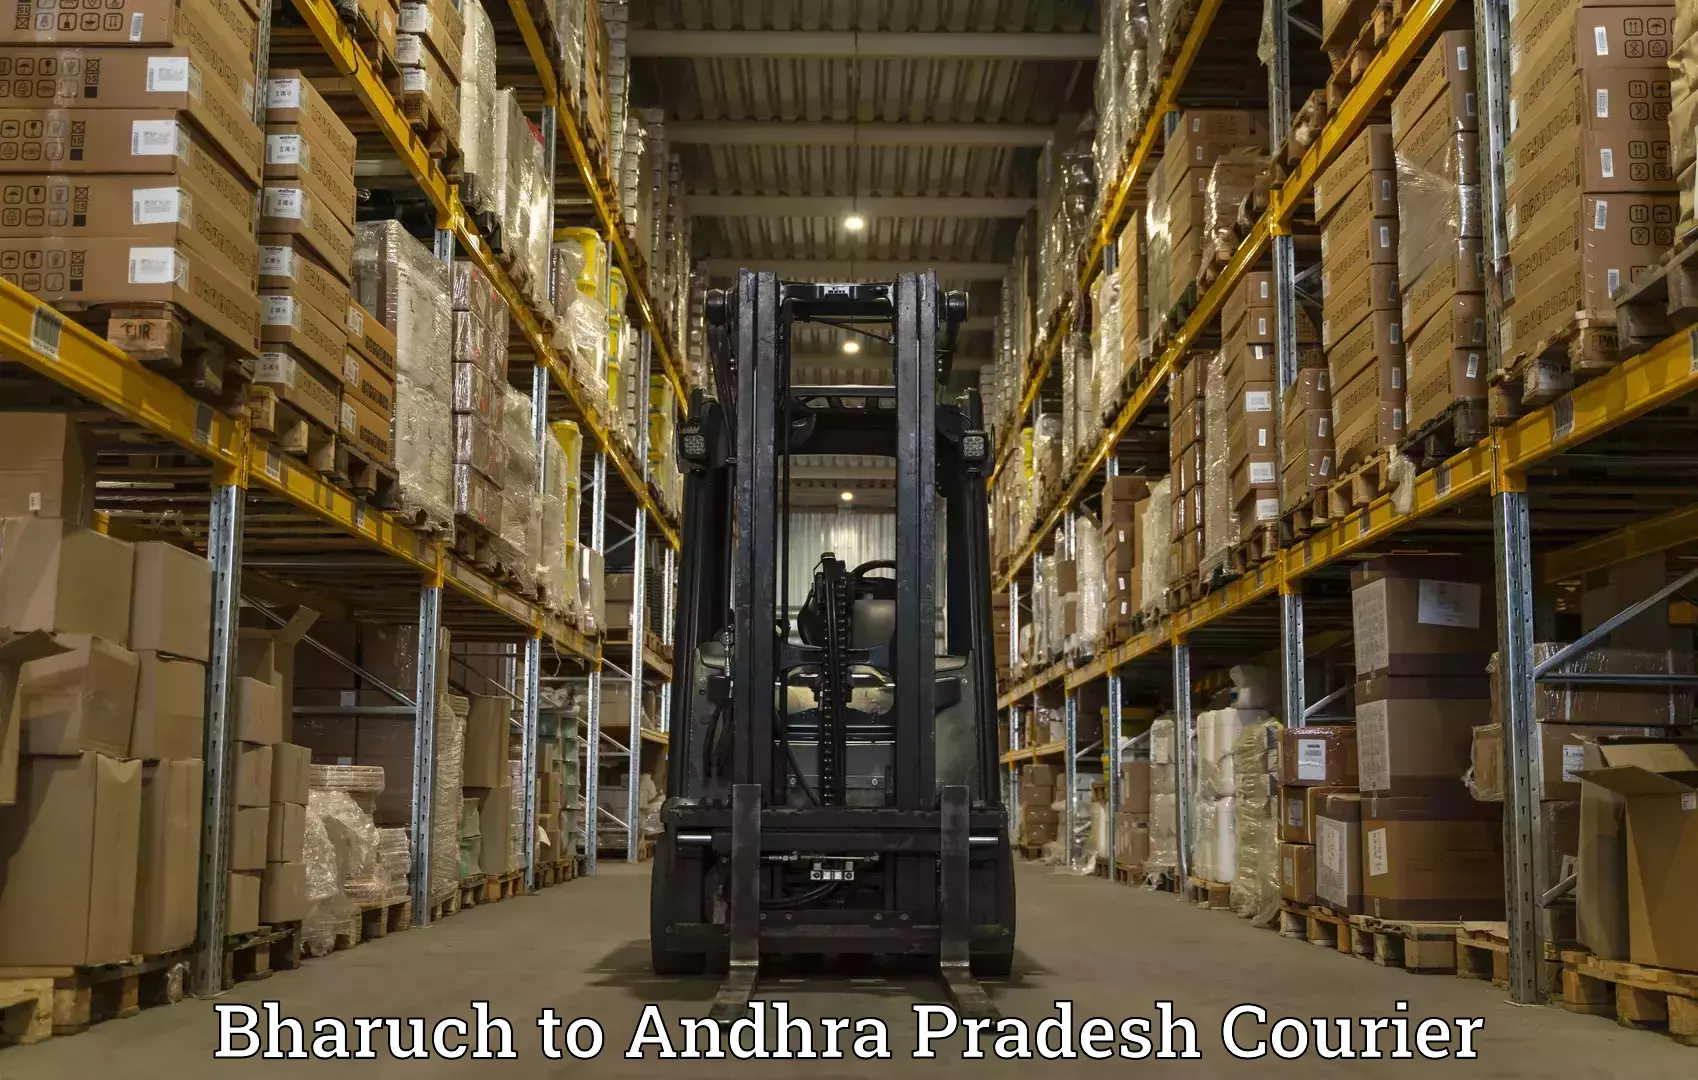 Holiday shipping services Bharuch to Visakhapatnam Port